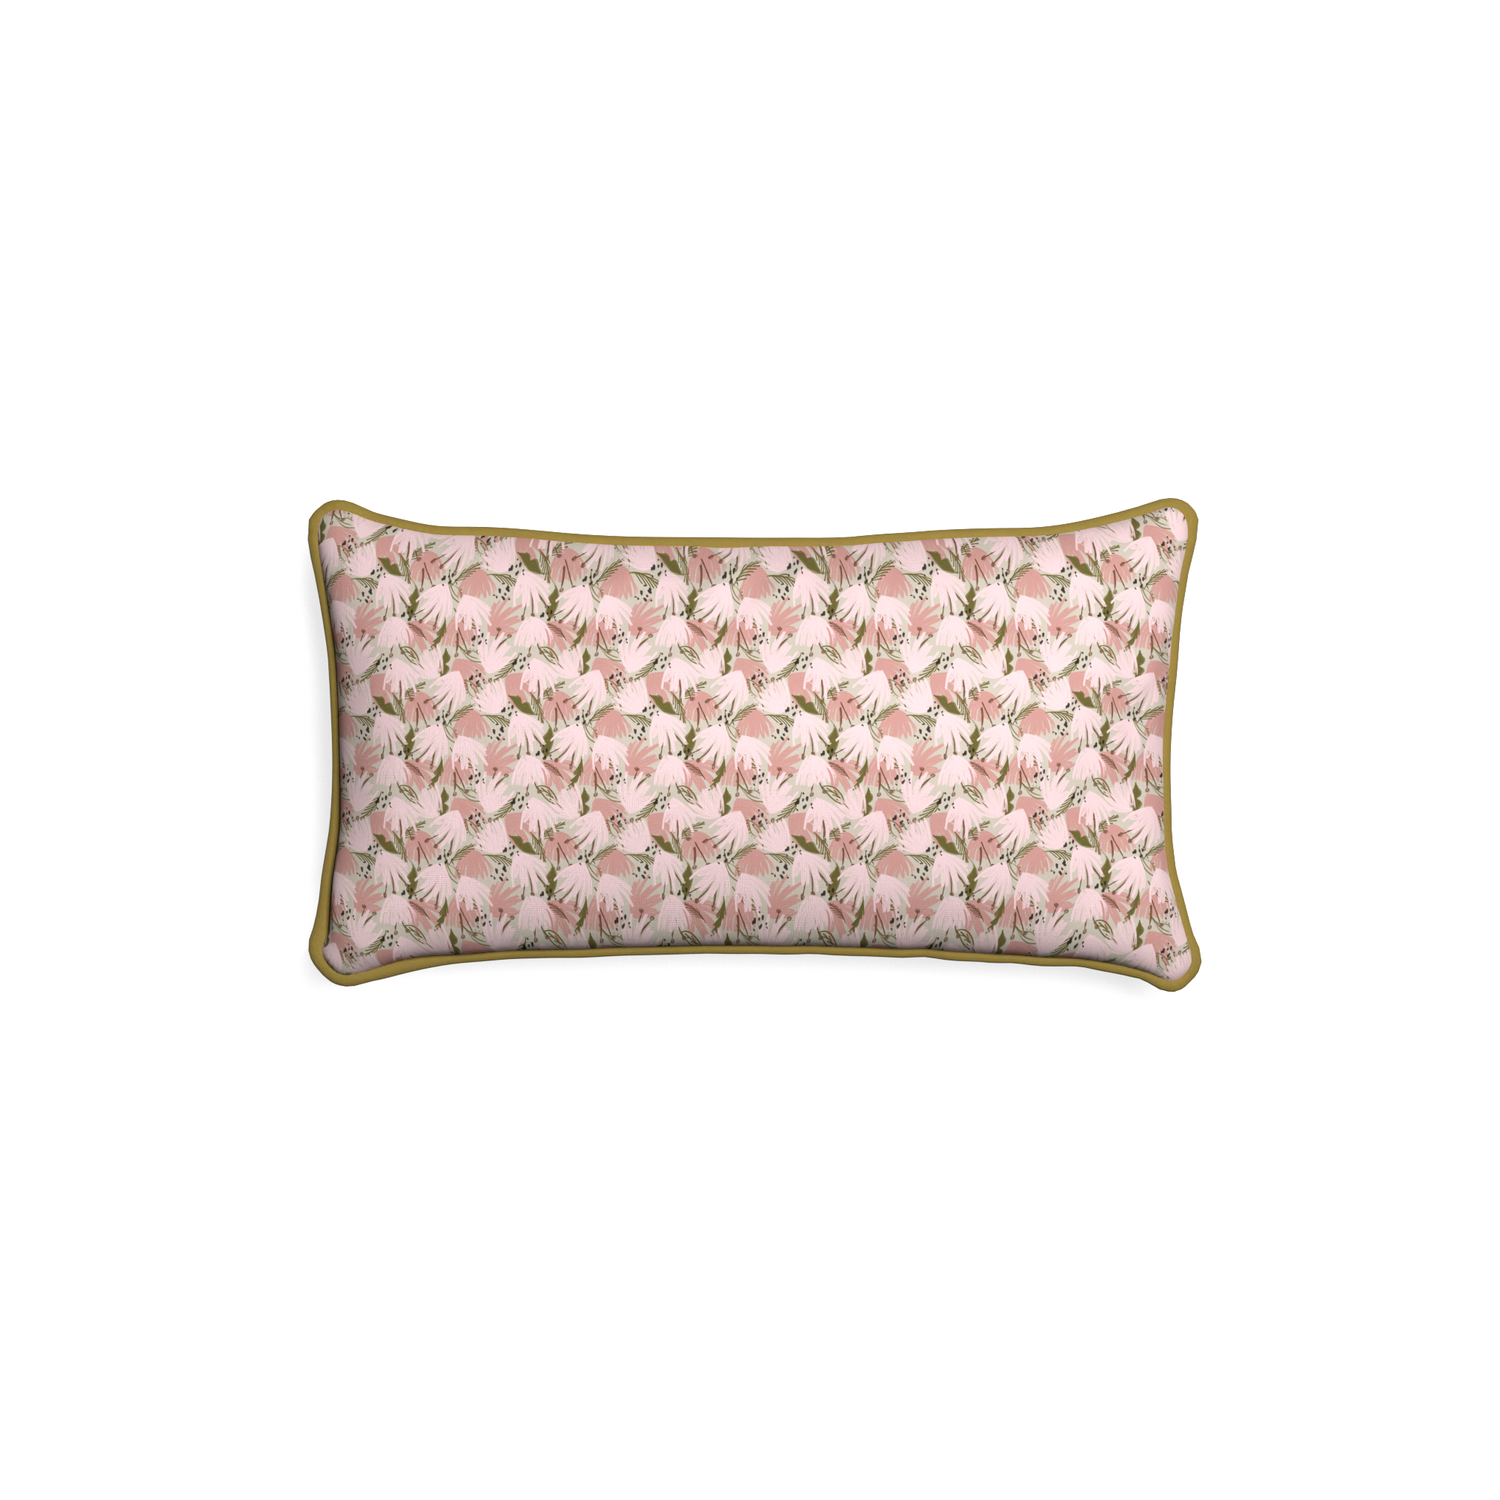 Petite-lumbar eden pink custom pink floralpillow with c piping on white background